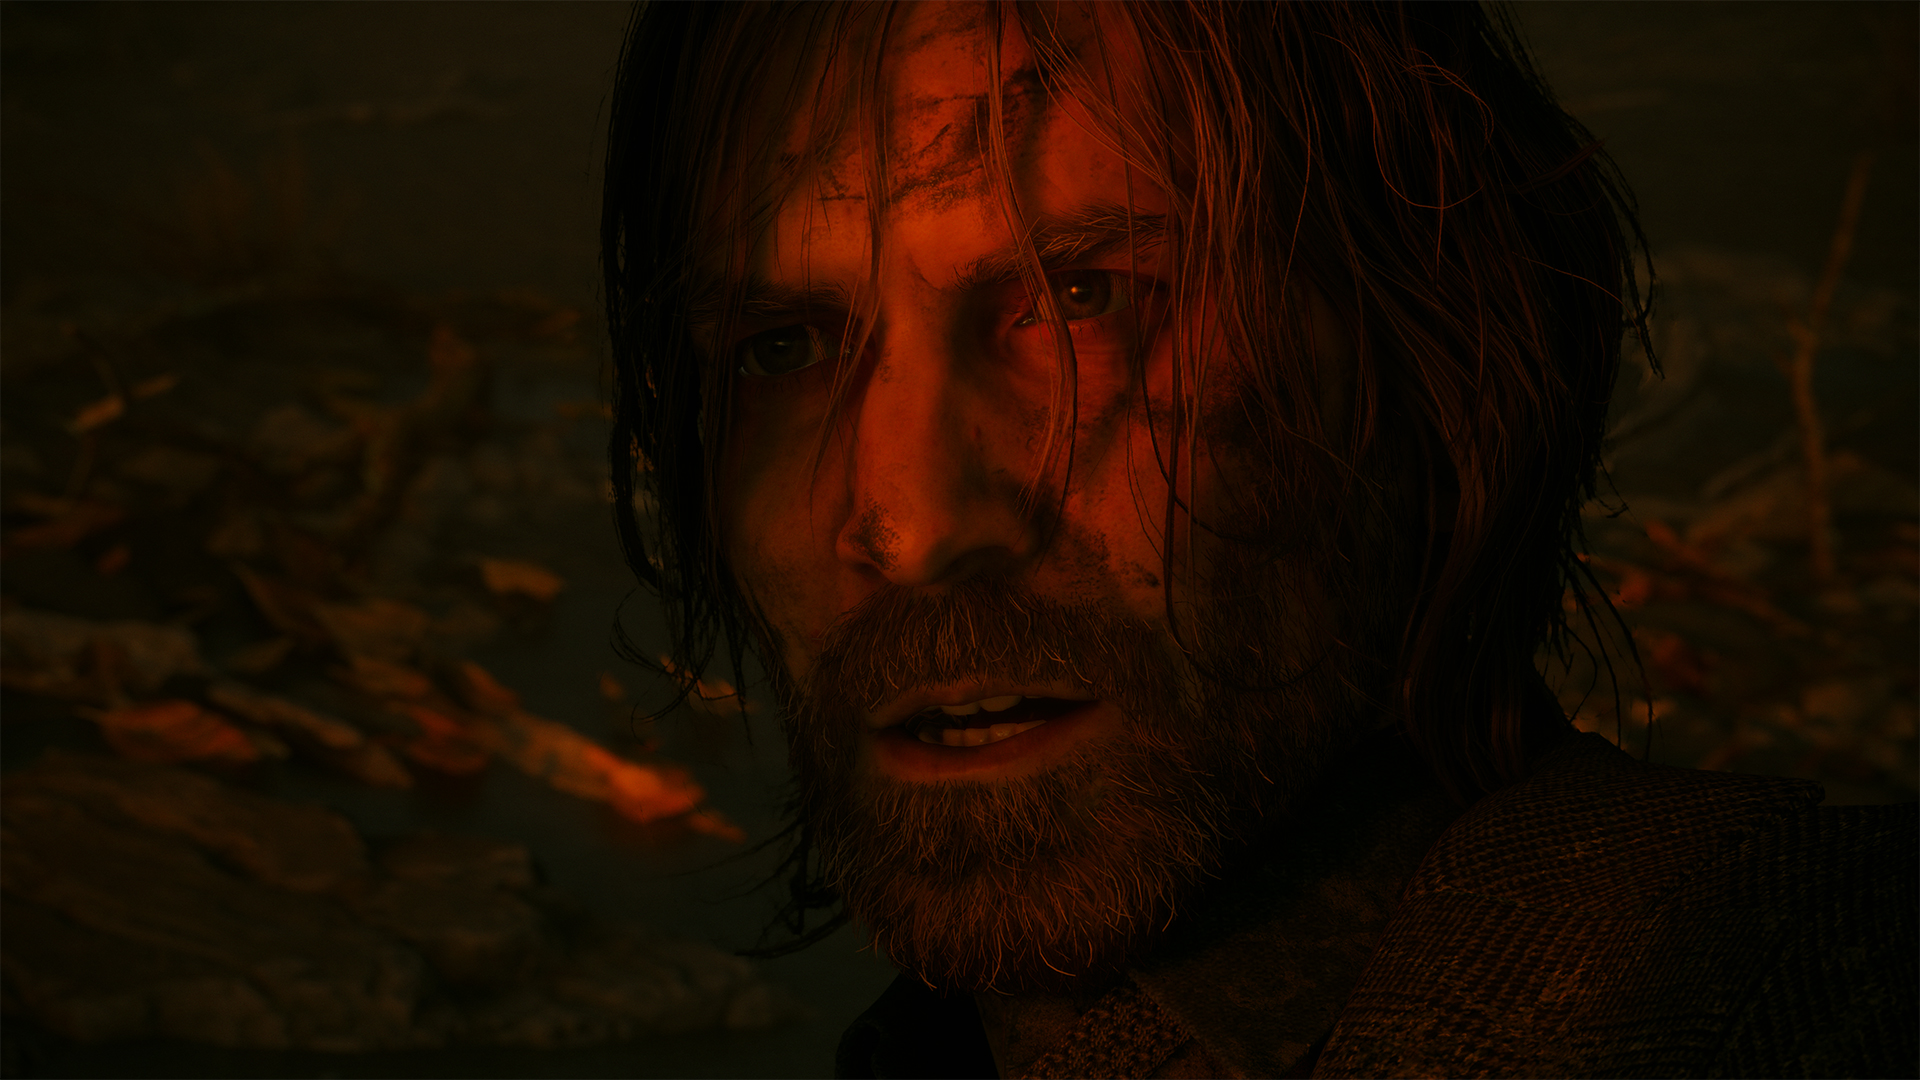 A grizzled Alan Wake, with his face bathed in red light